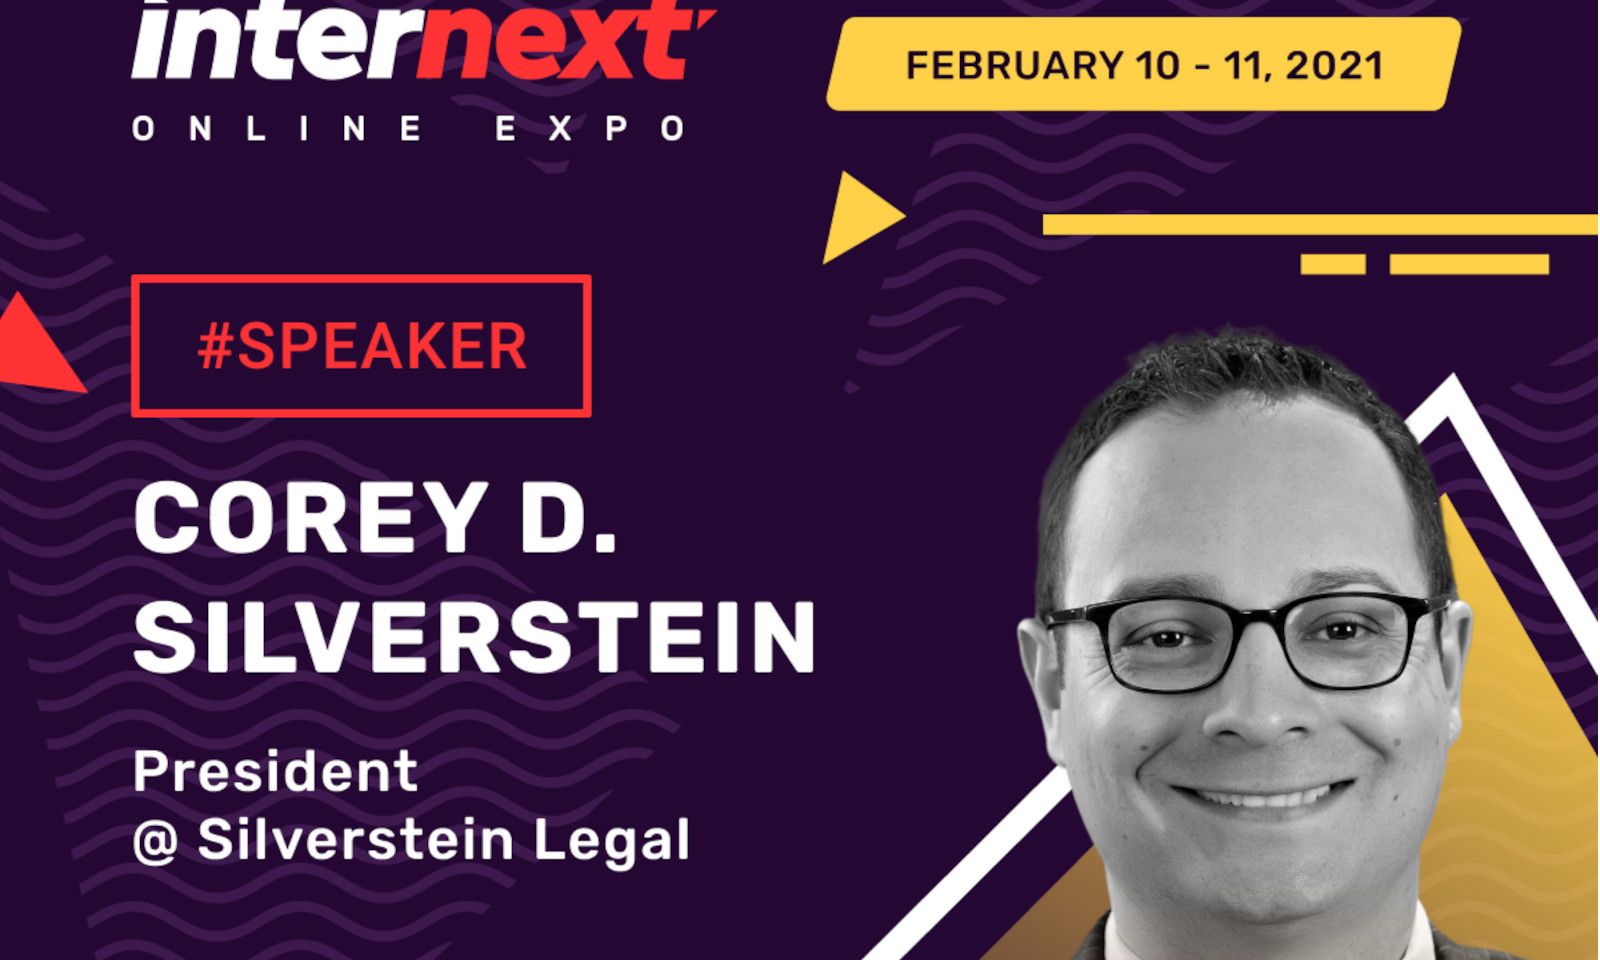 Legal Expert Corey D. Silverstein to Lead interNEXT Panels